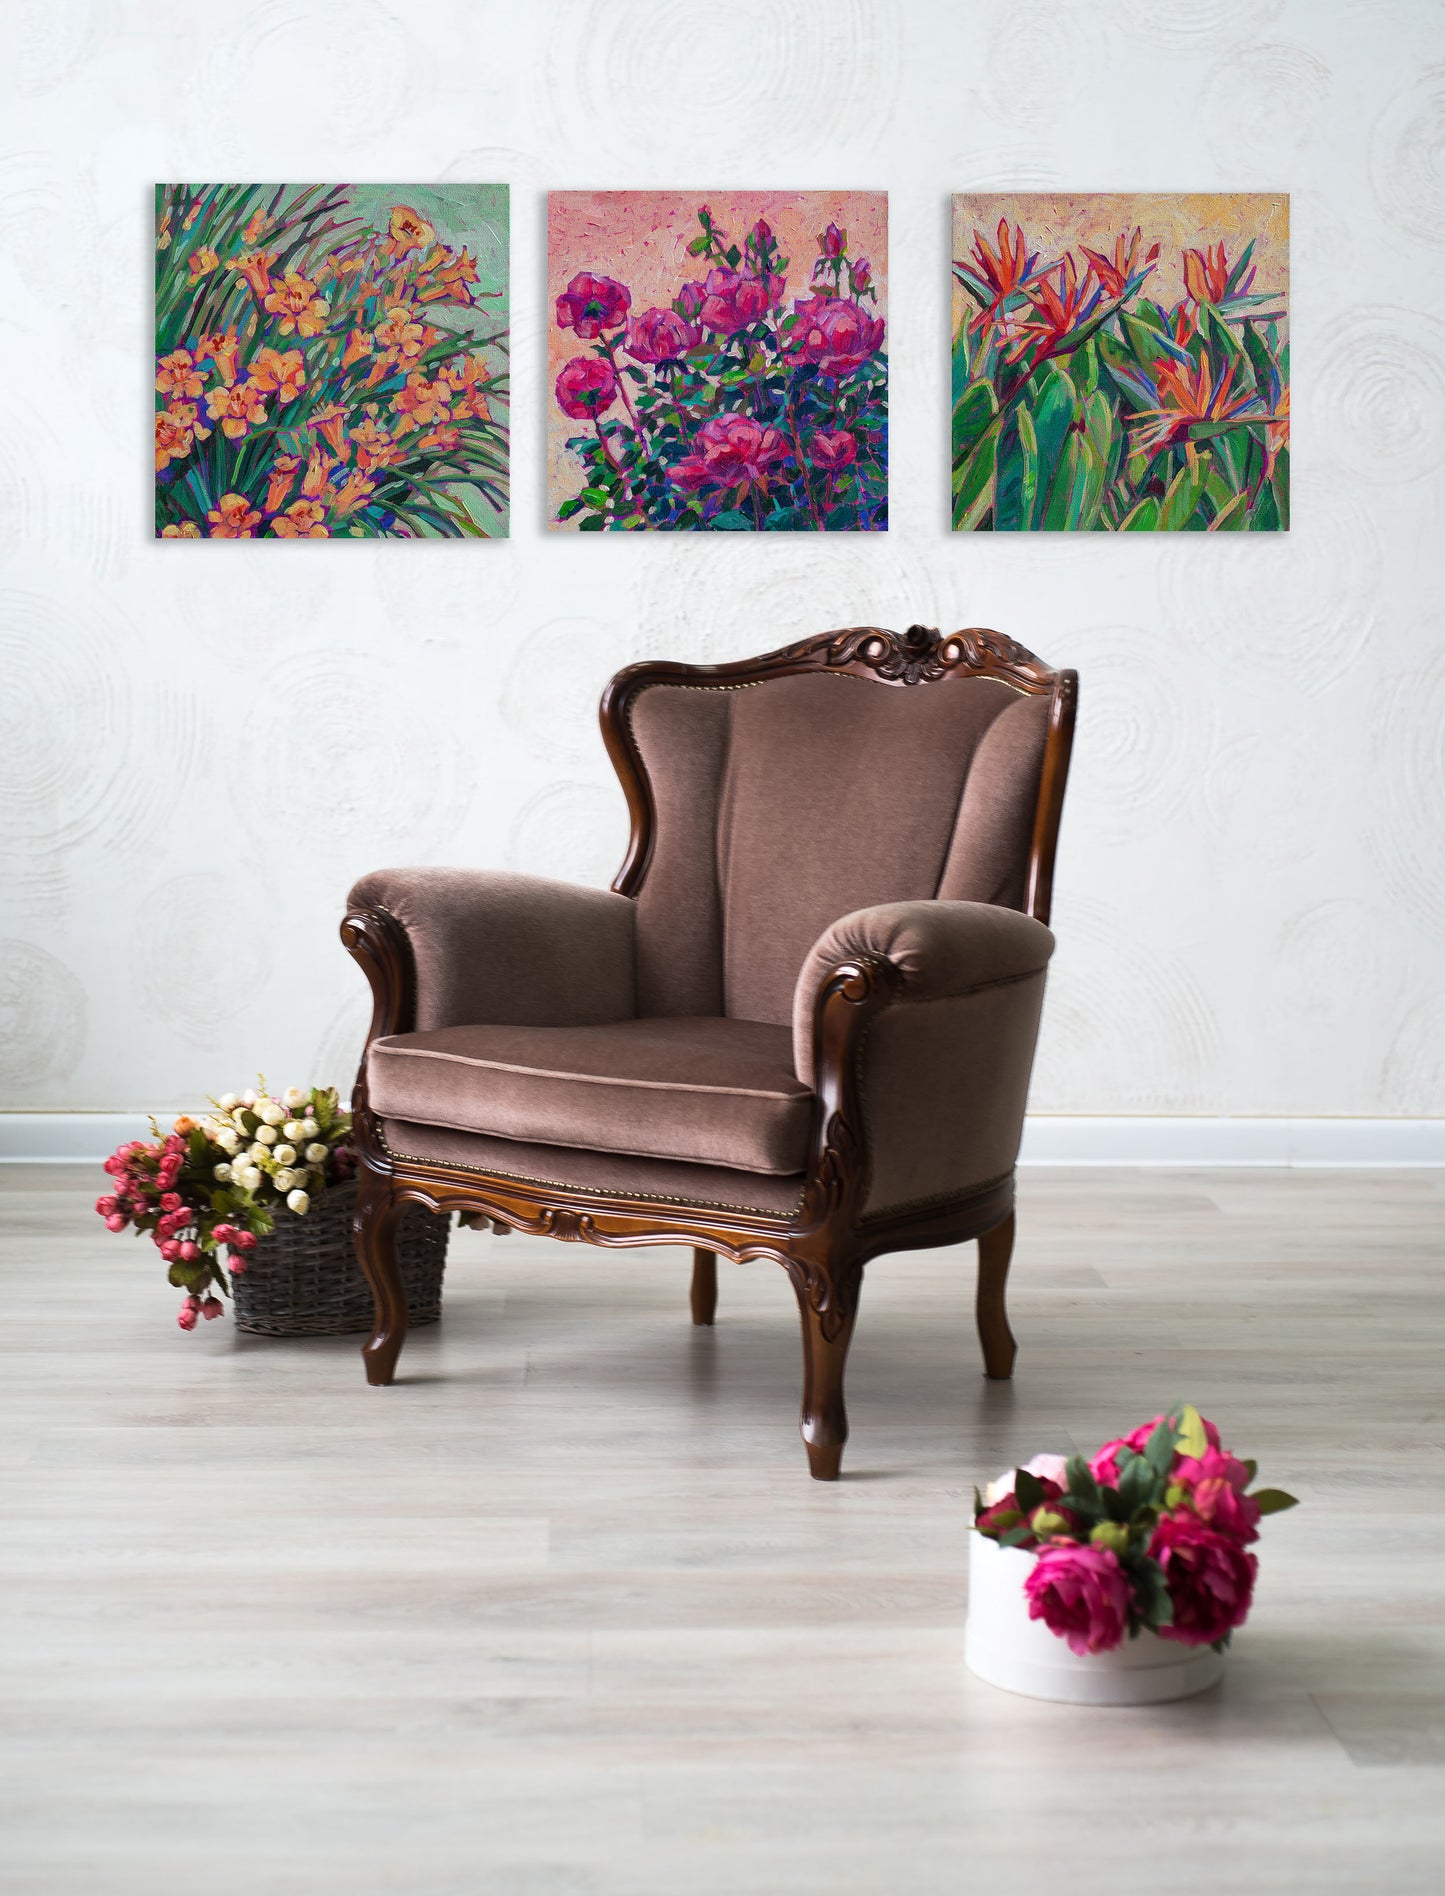 three floral paintings with chair